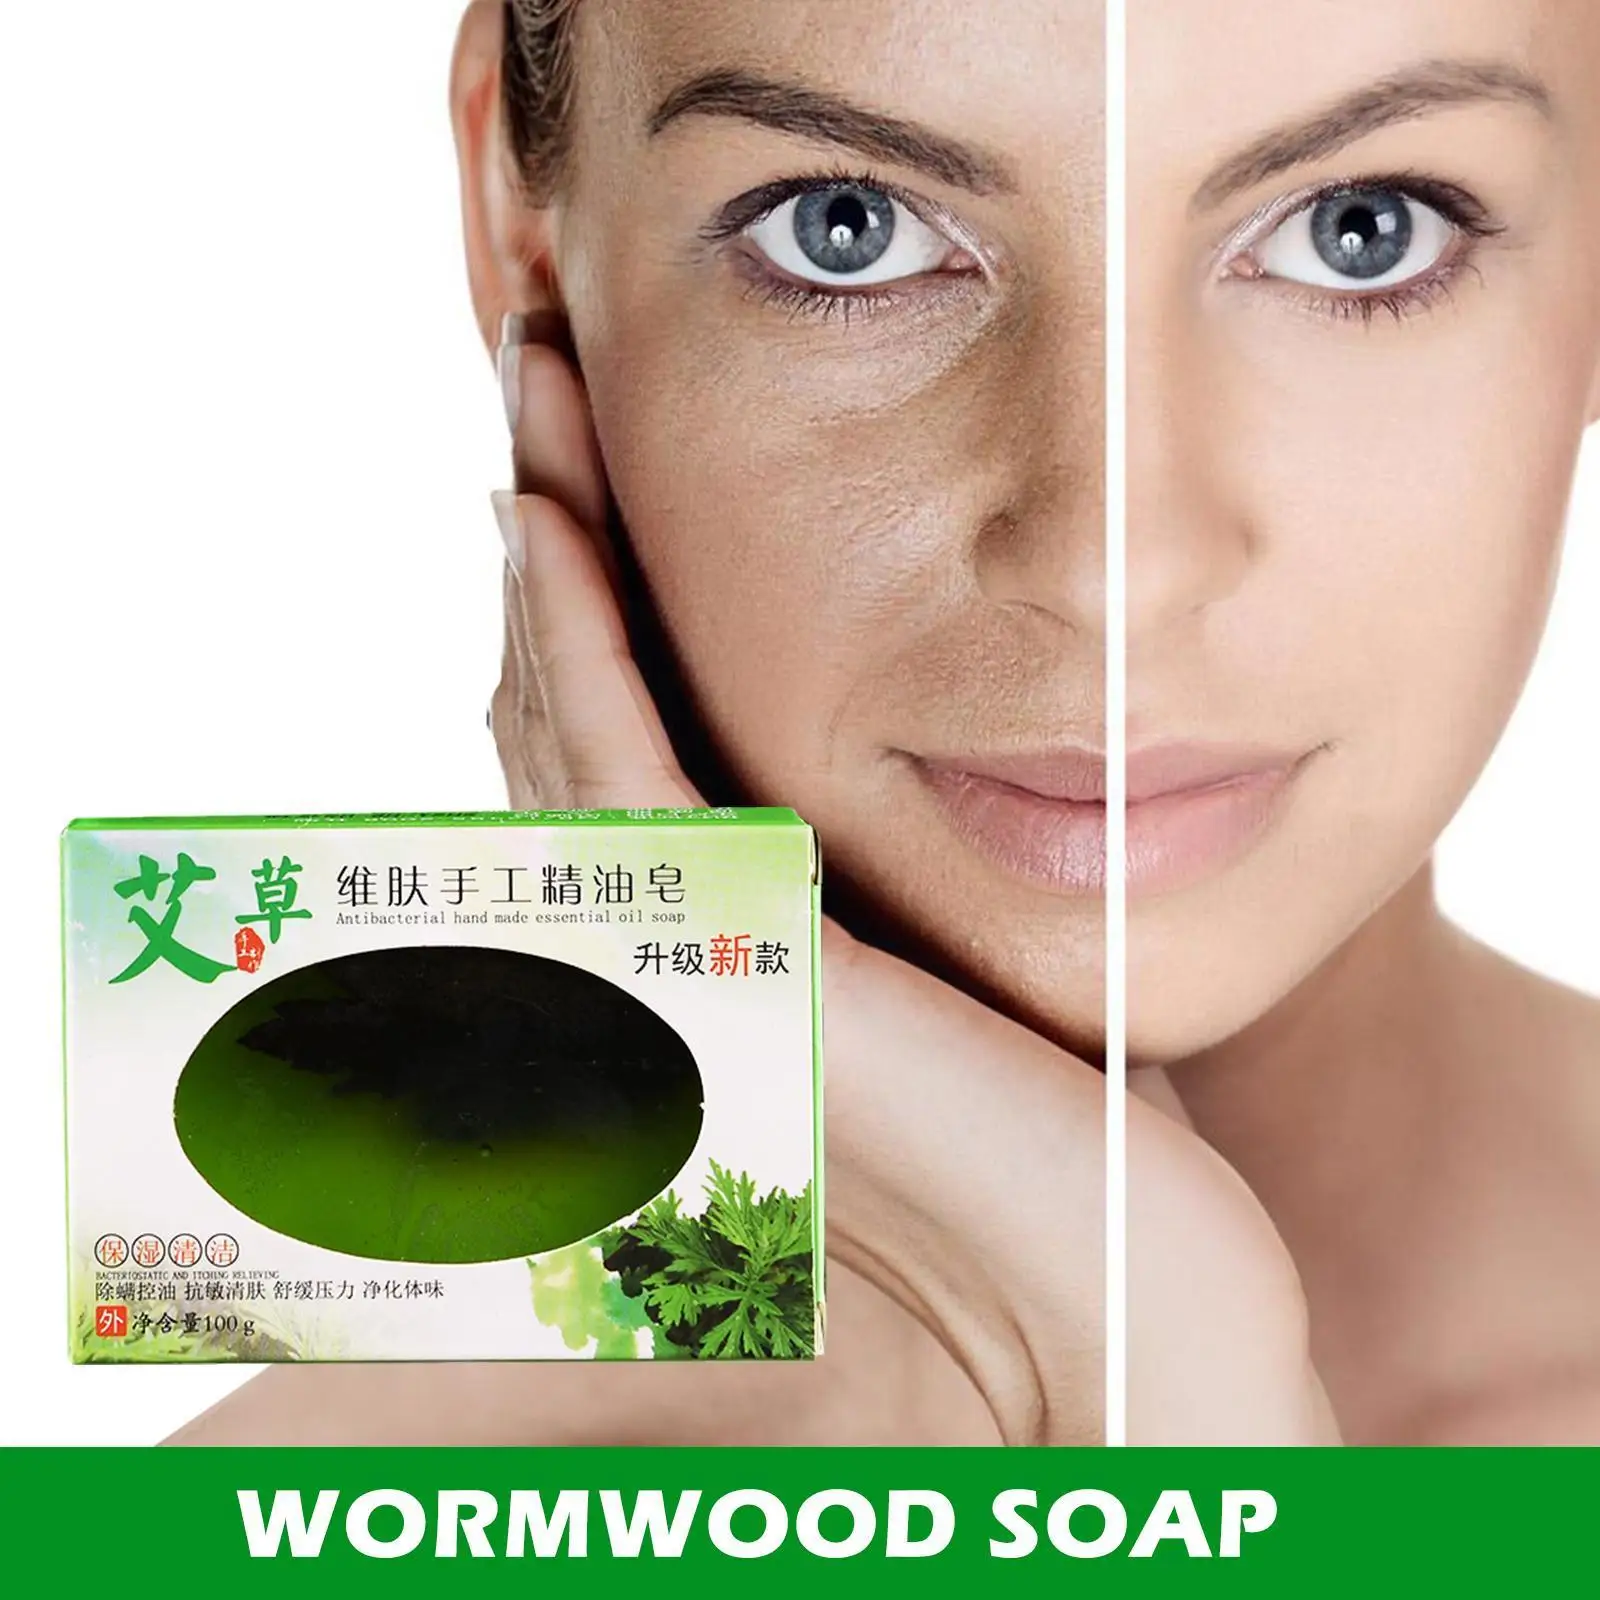 

100g Wormwood Soapto Kill Mites Cleansing Decontamination Soap Soap Oil Hand Essential Cleaning Tools Bamboo Charcoal C8s5